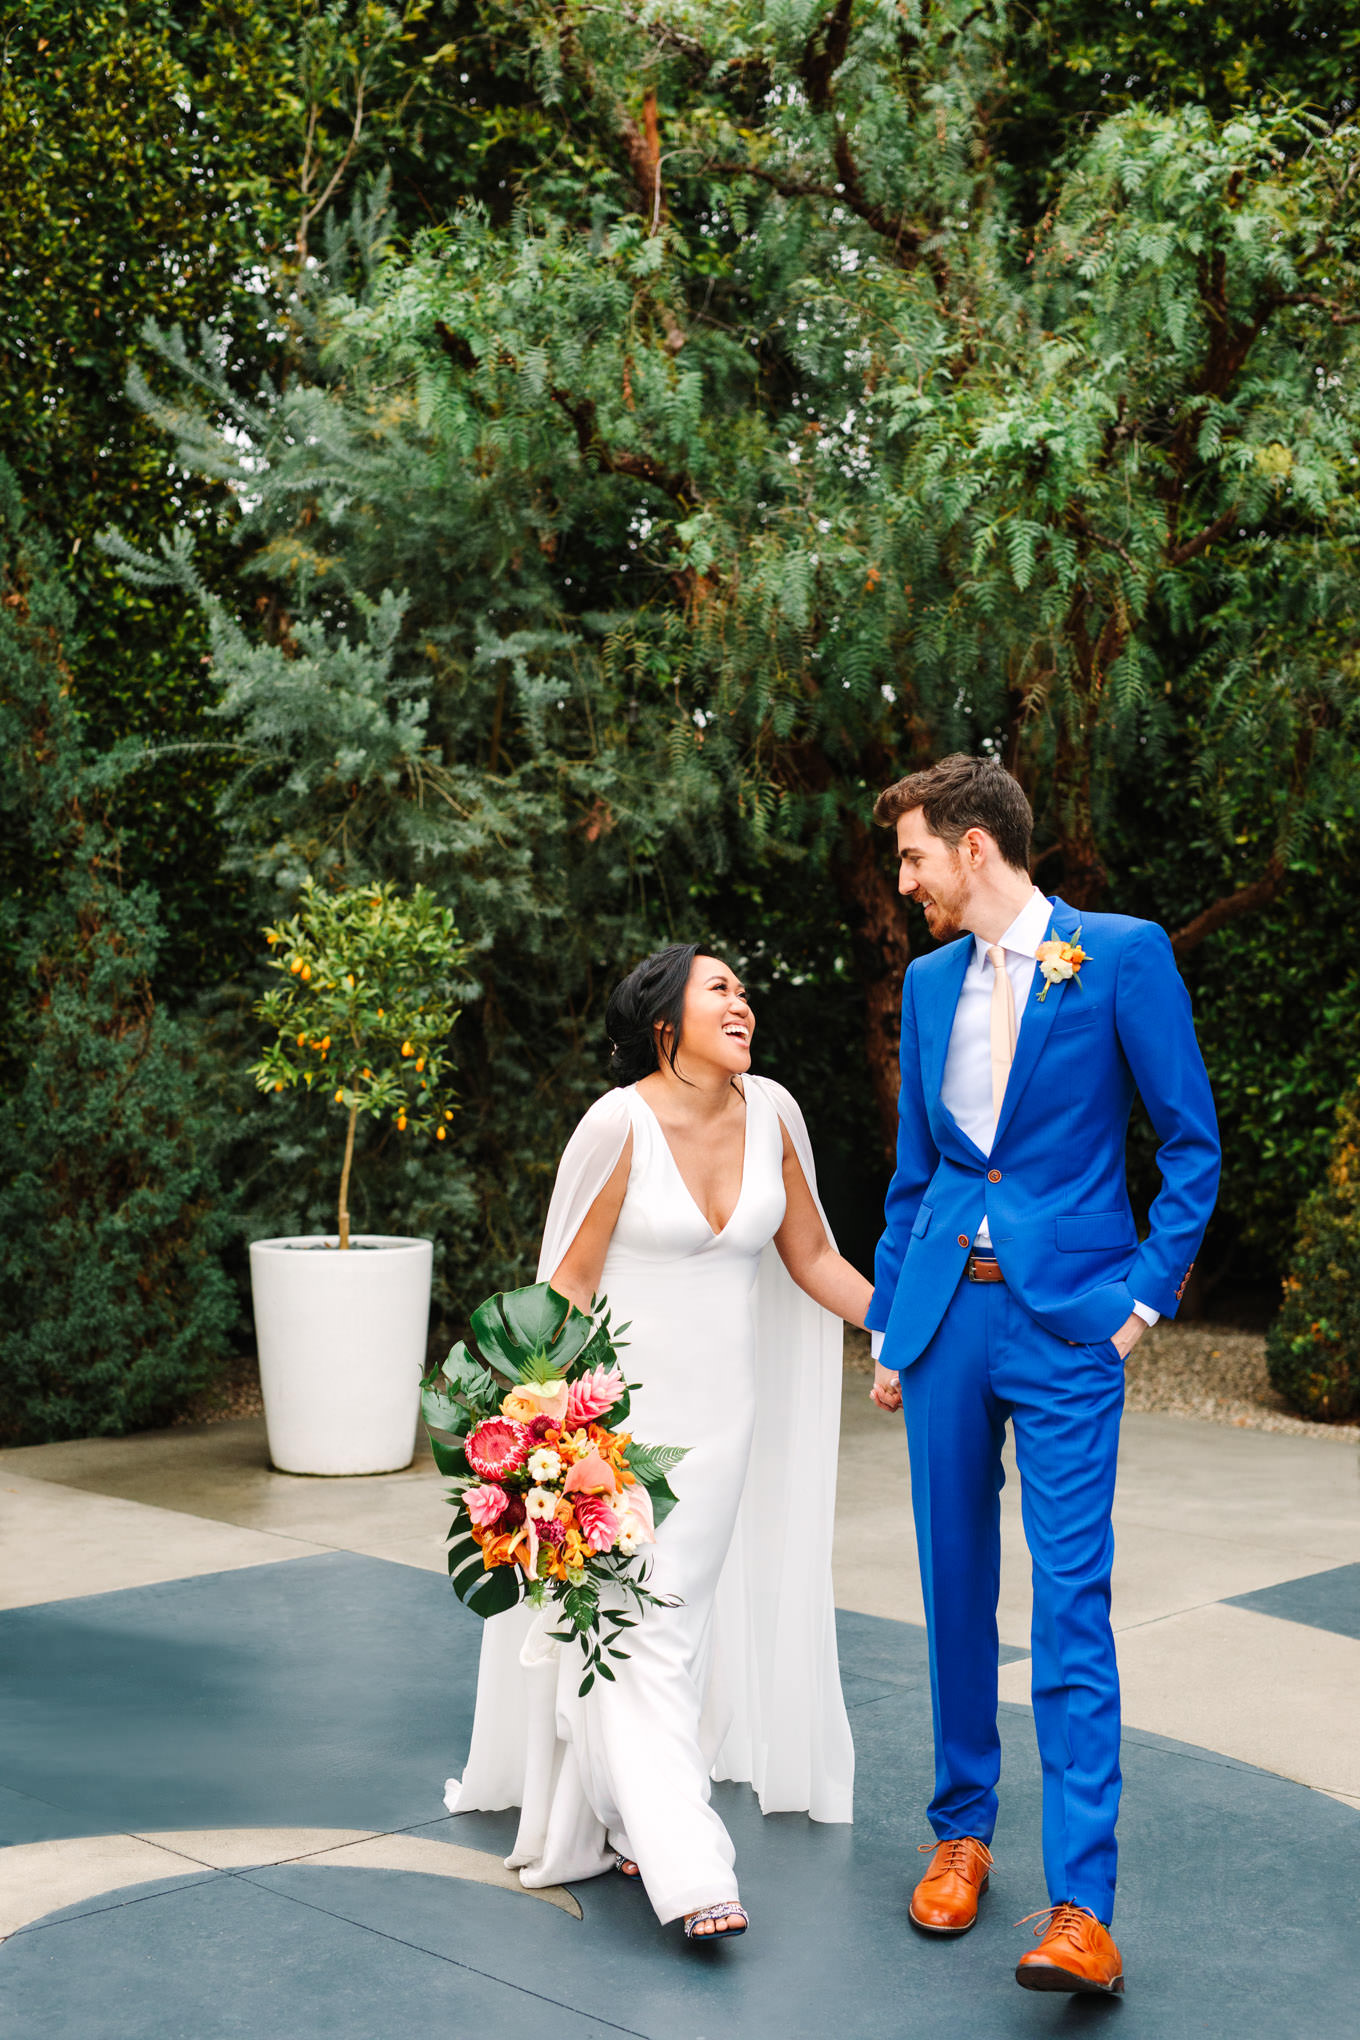 Bride and groom laughing at The Fig House wedding | Engagement, elopement, and wedding photography roundup of Mary Costa’s favorite images from 2020 | Colorful and elevated photography for fun-loving couples in Southern California | #2020wedding #elopement #weddingphoto #weddingphotography   Source: Mary Costa Photography | Los Angeles